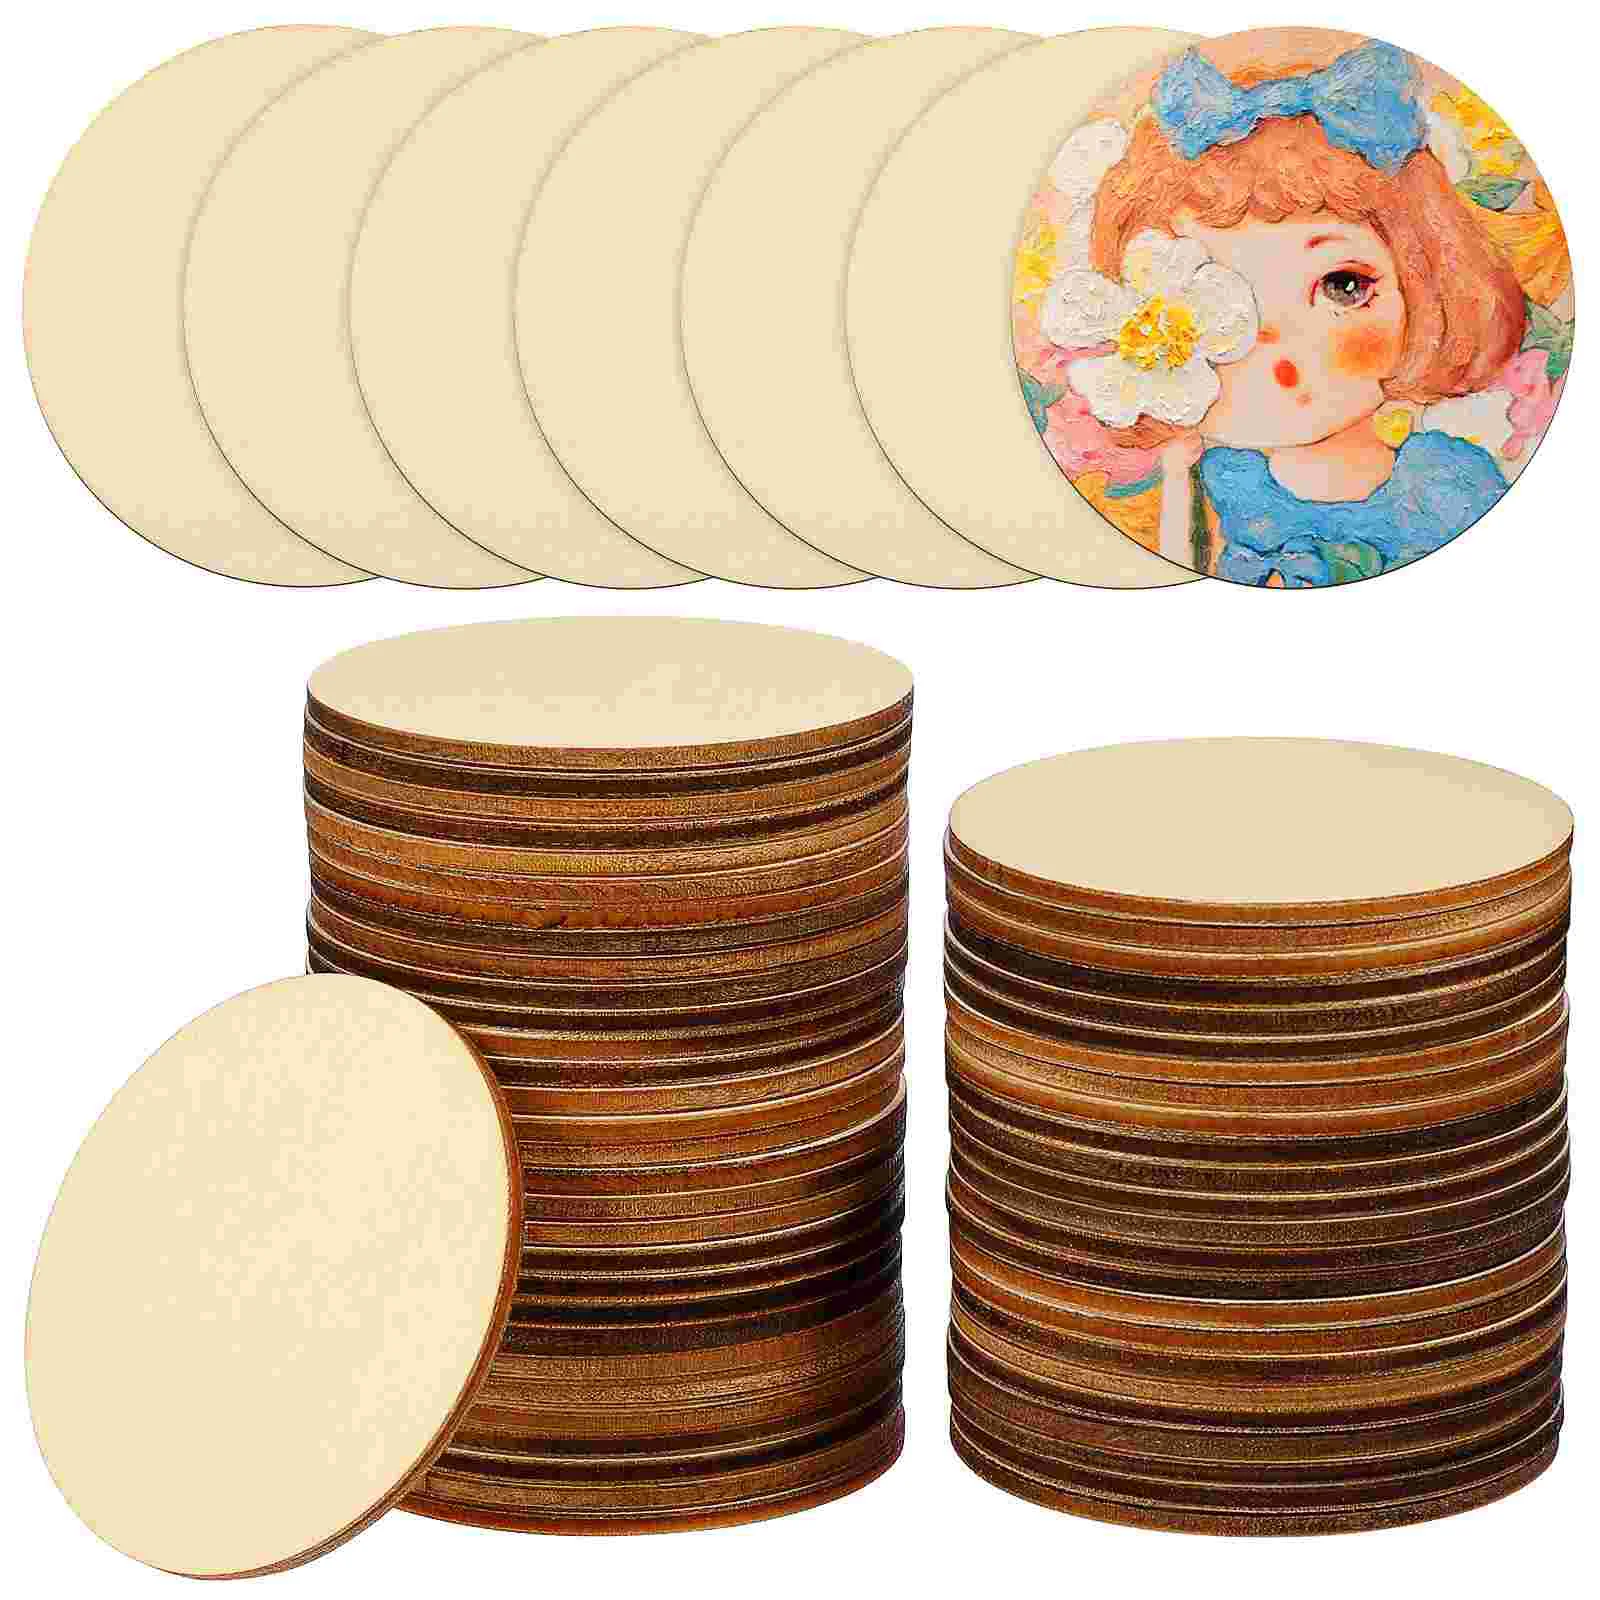 

50 Pcs Log Color Round Wood Chips Wooden Discs Craft Pieces Centerpieces Unfinished Slices Blank Labels Ornaments Circle